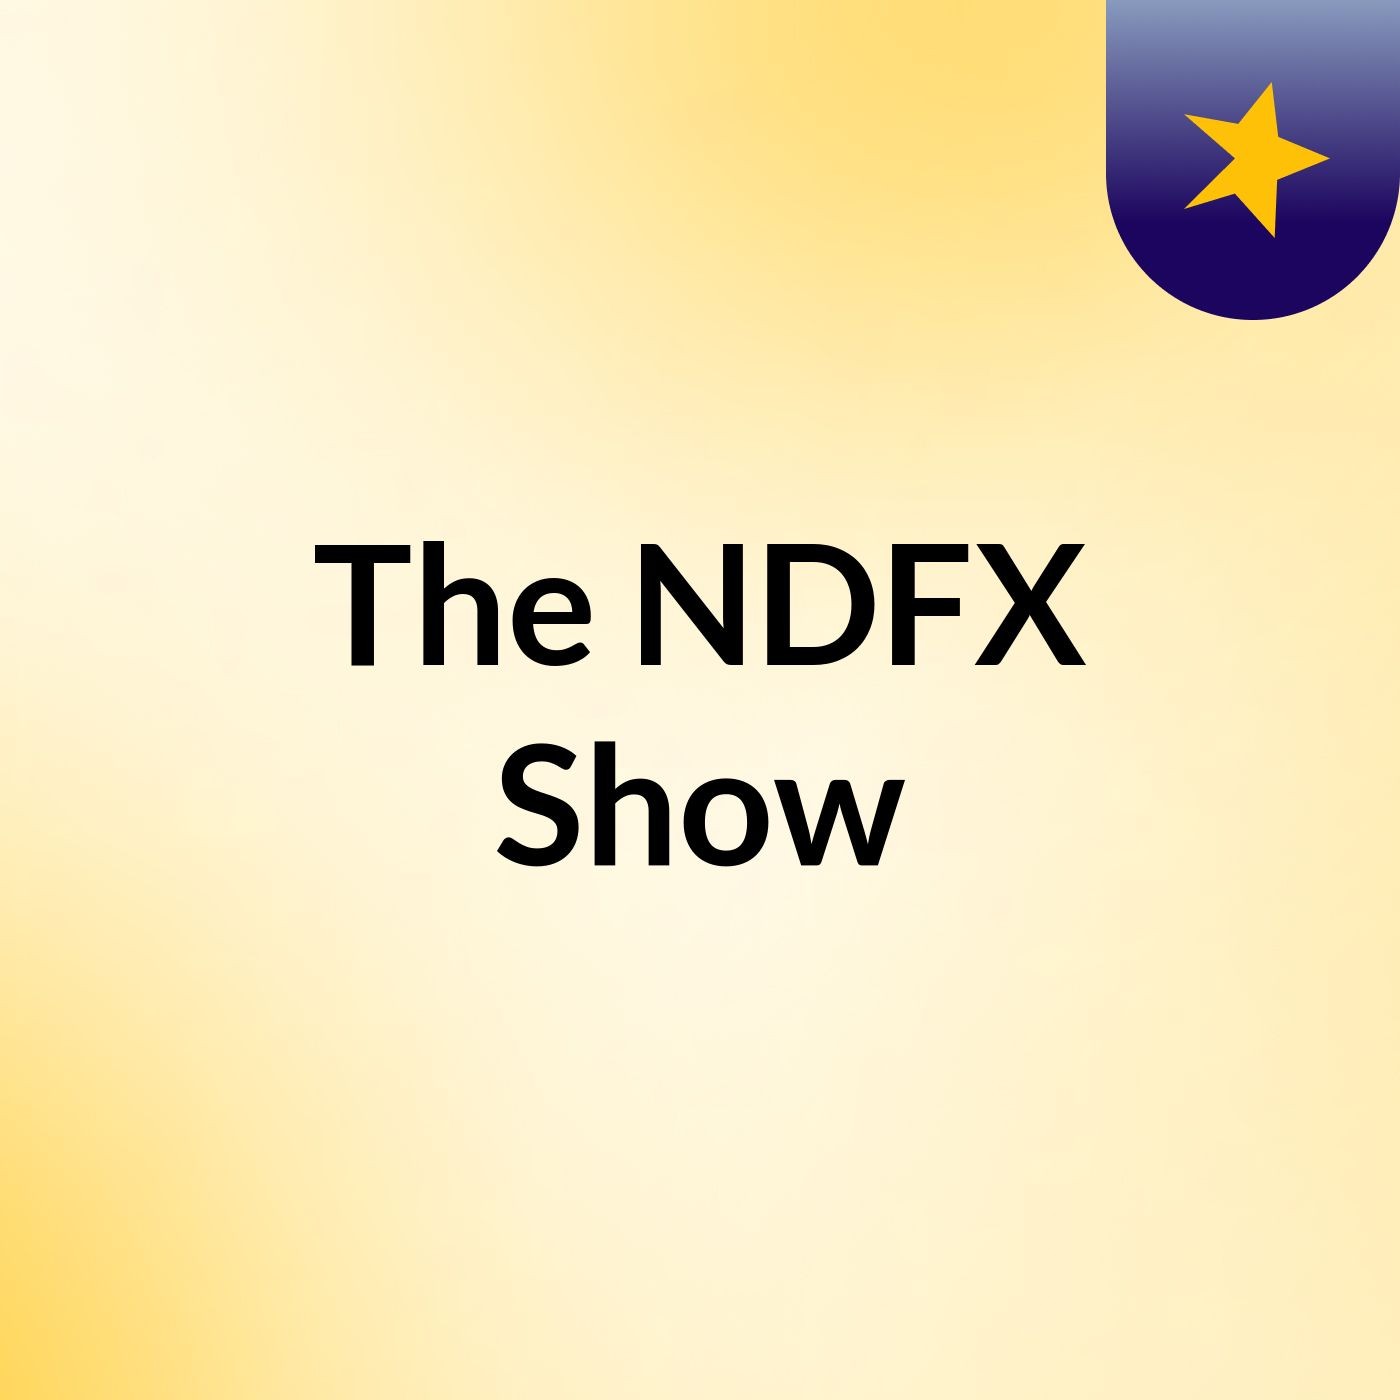 The NDFX Show